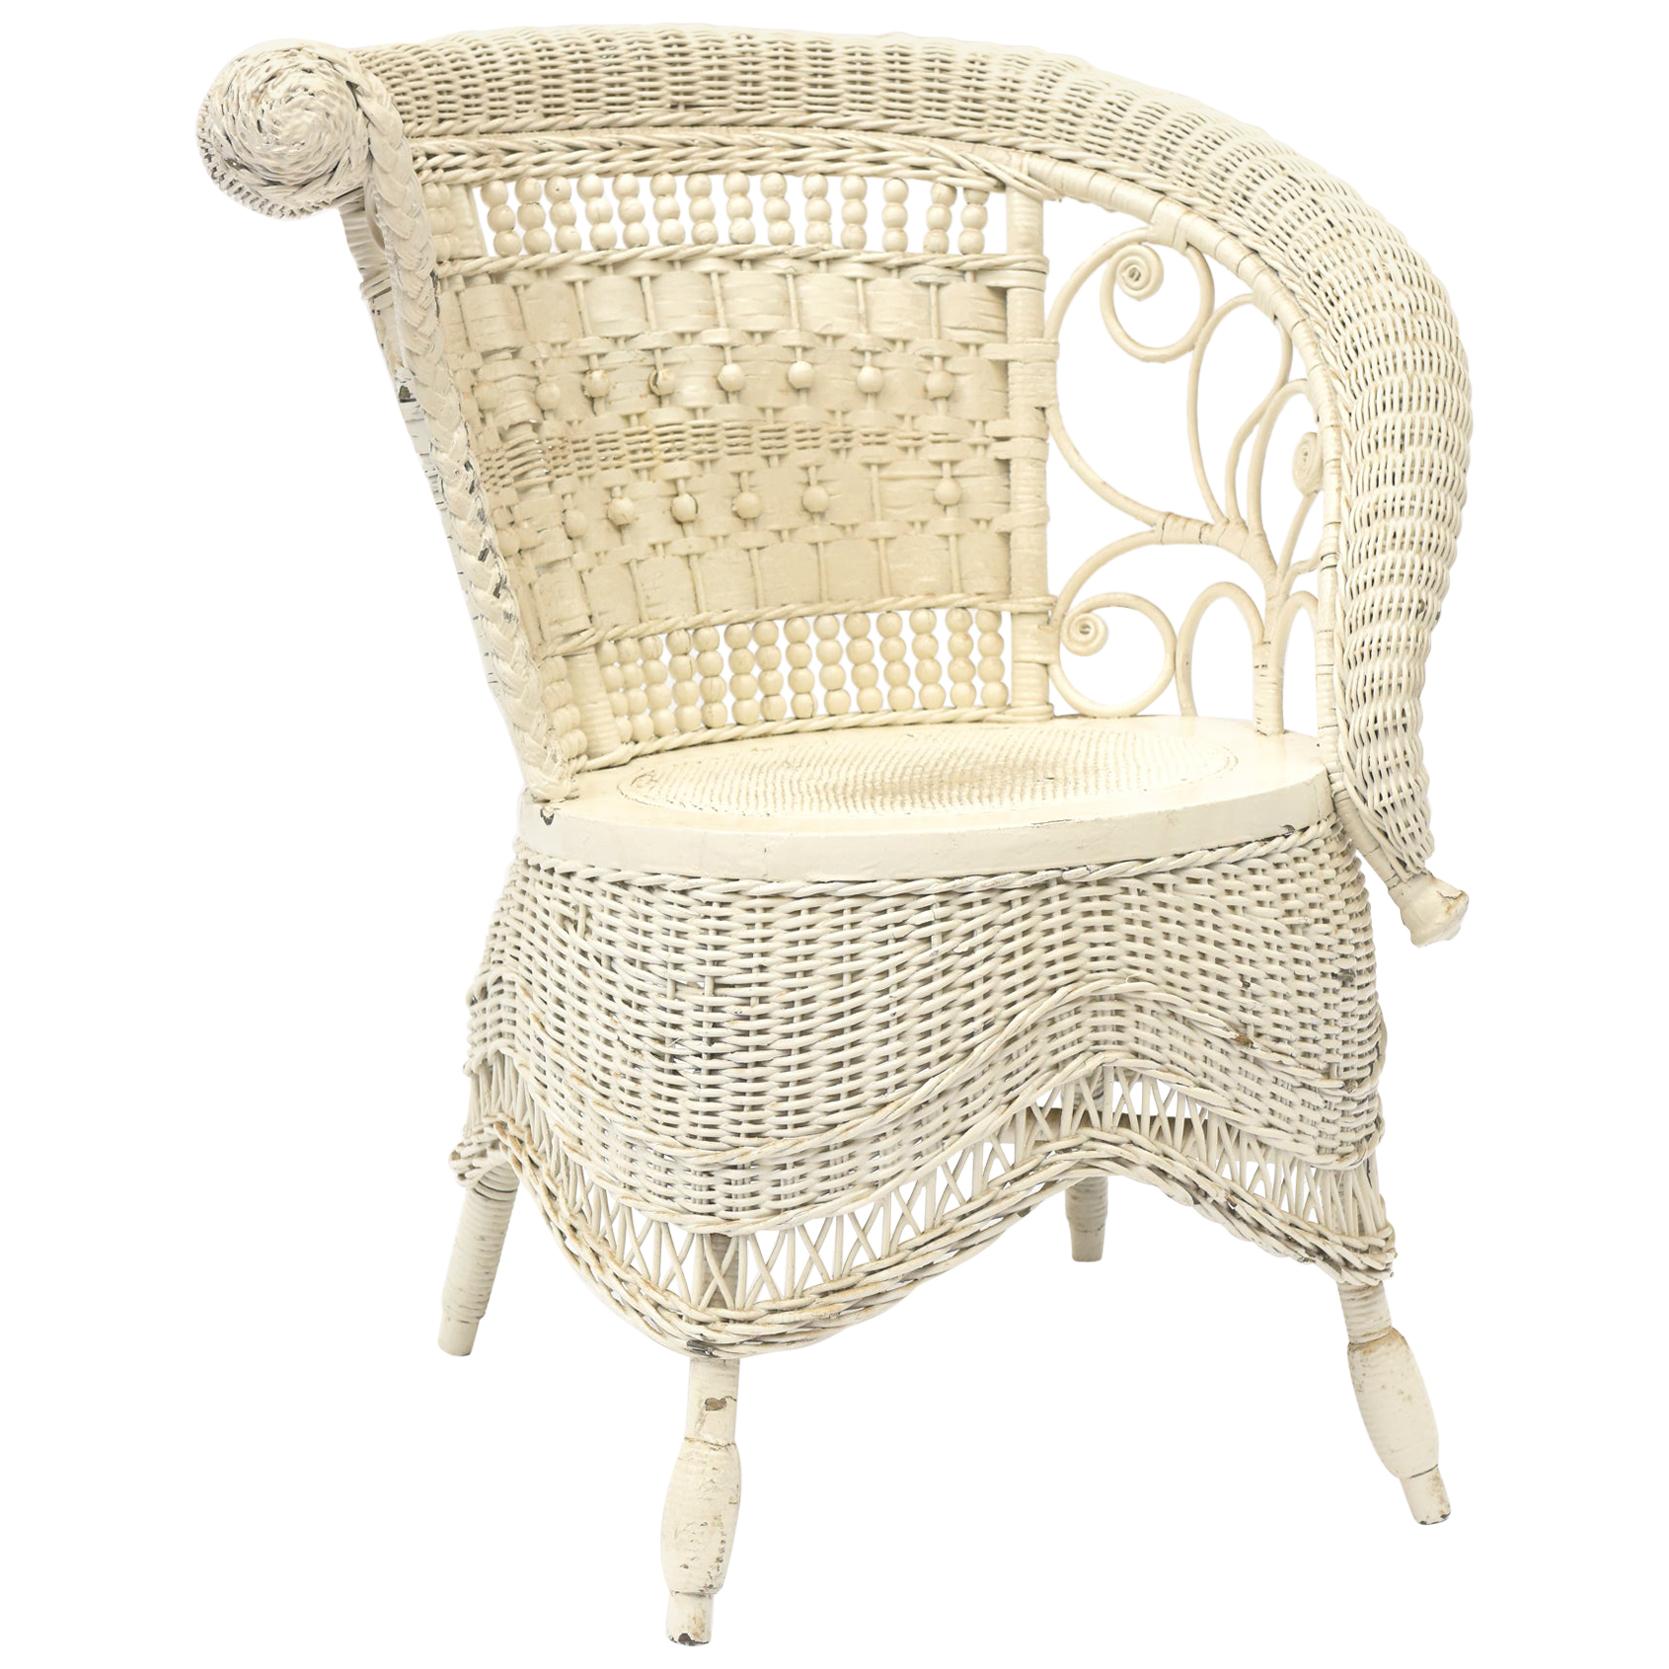 Antique Wicker Chairs For Sale Flash Sales, SAVE 32% - kirche-weene.de